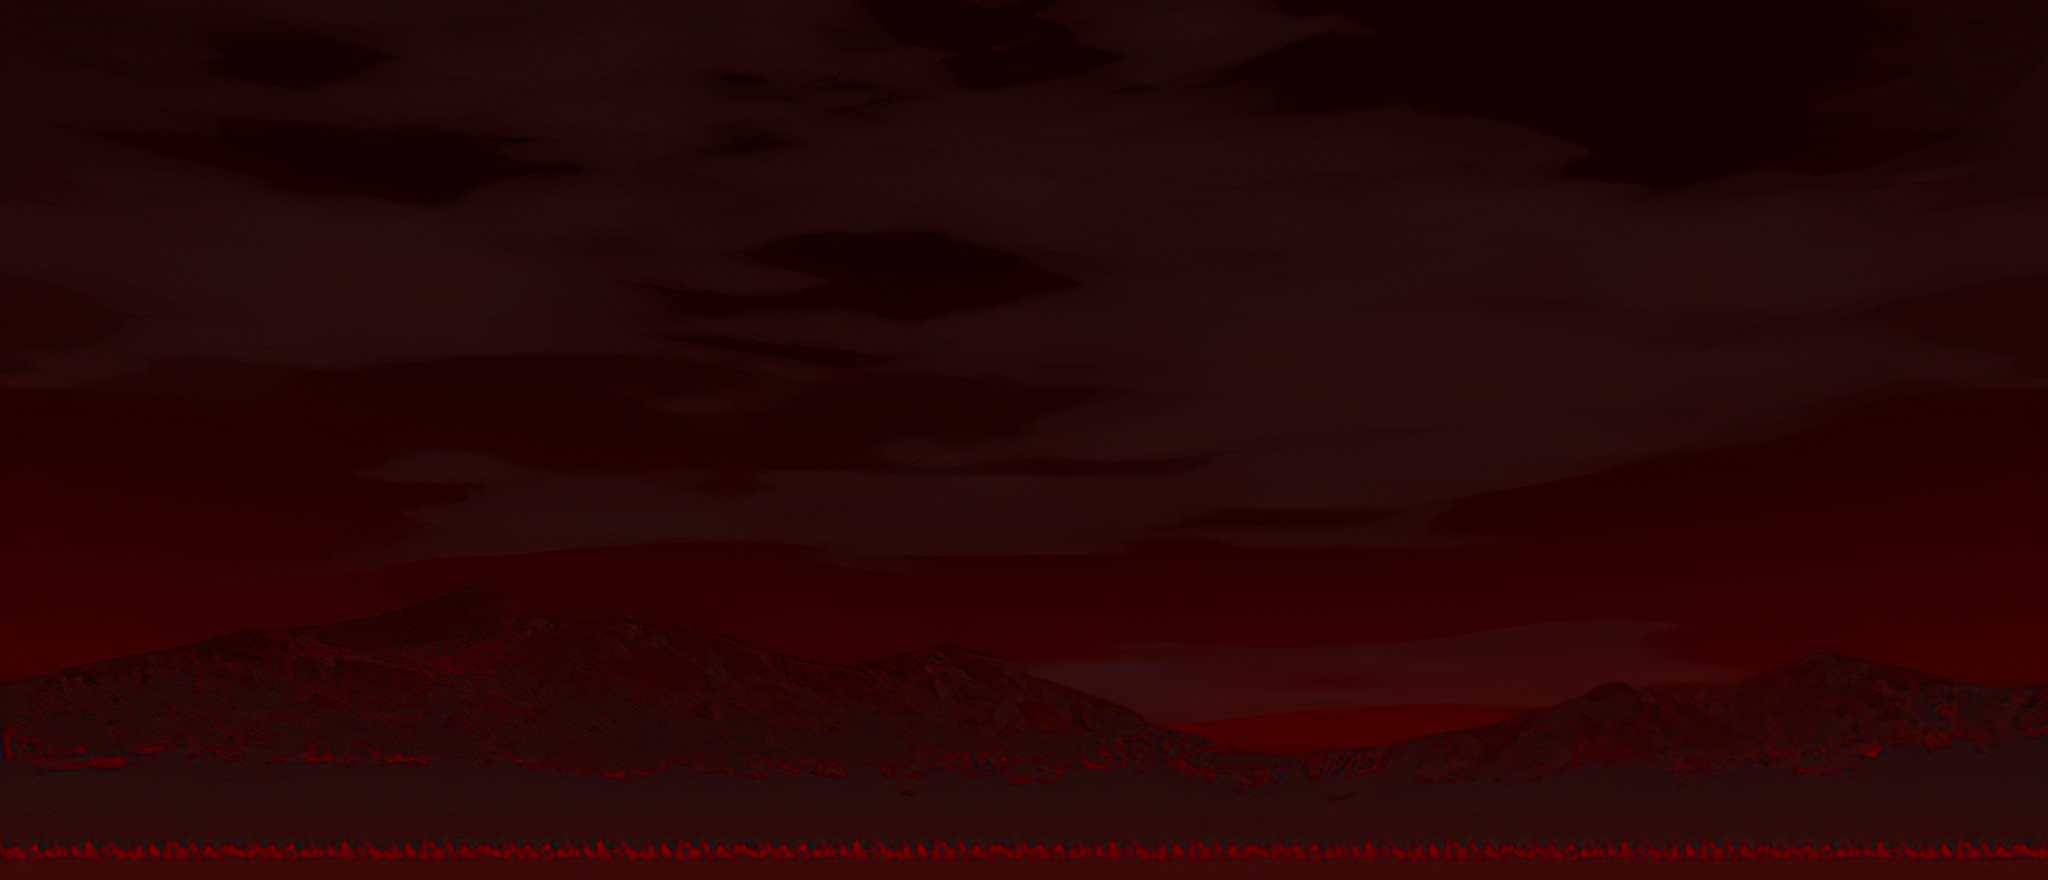 [UPSCALED[ red sky - night - mountains.png